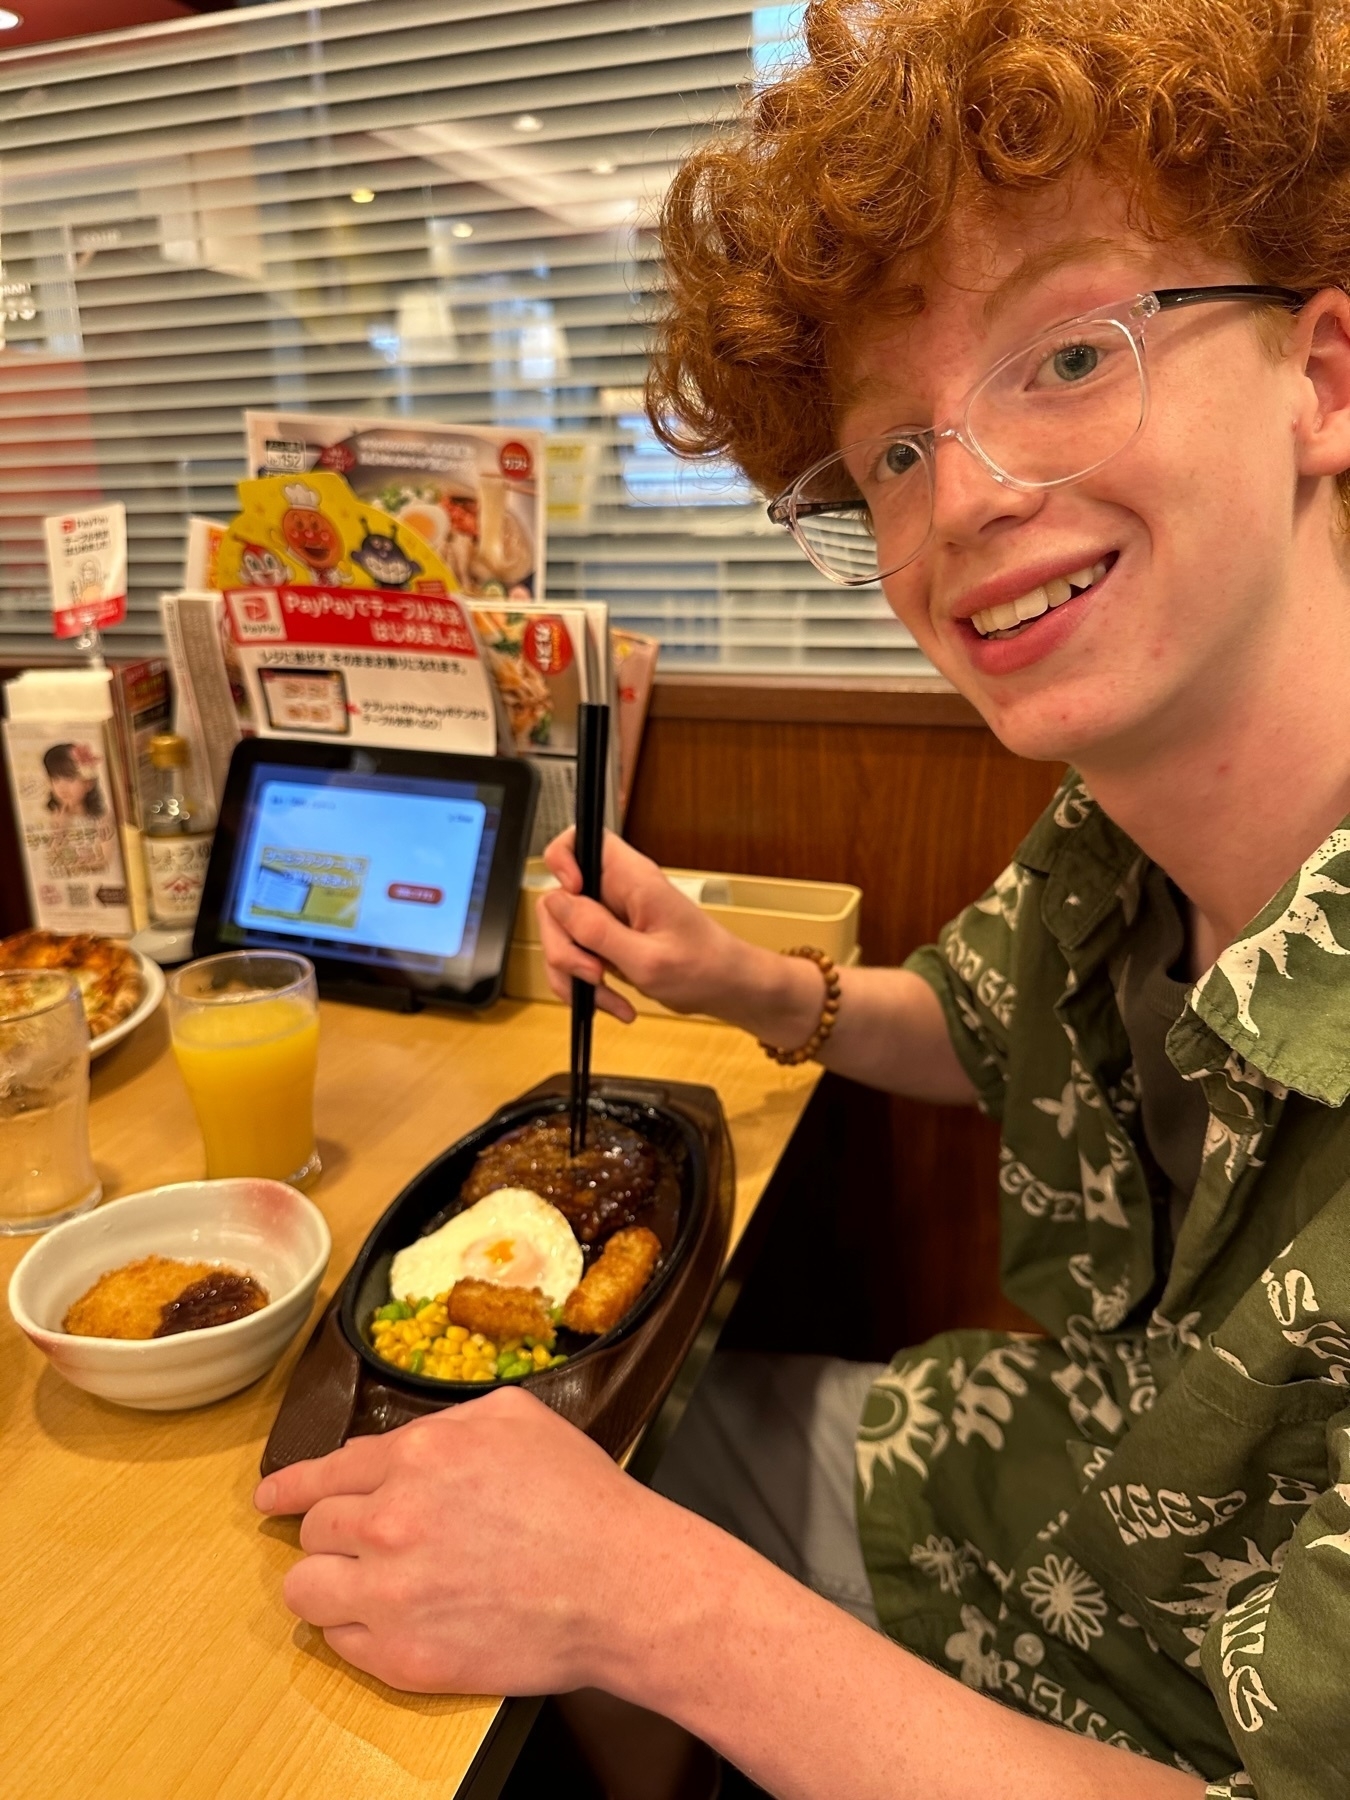 A smiling person with red curly hair, wearing glasses and a green patterned shirt, seated at a restaurant table with a tray of food including a hamburger steak with an egg on top, hash browns, and corn, with a side of ketchup